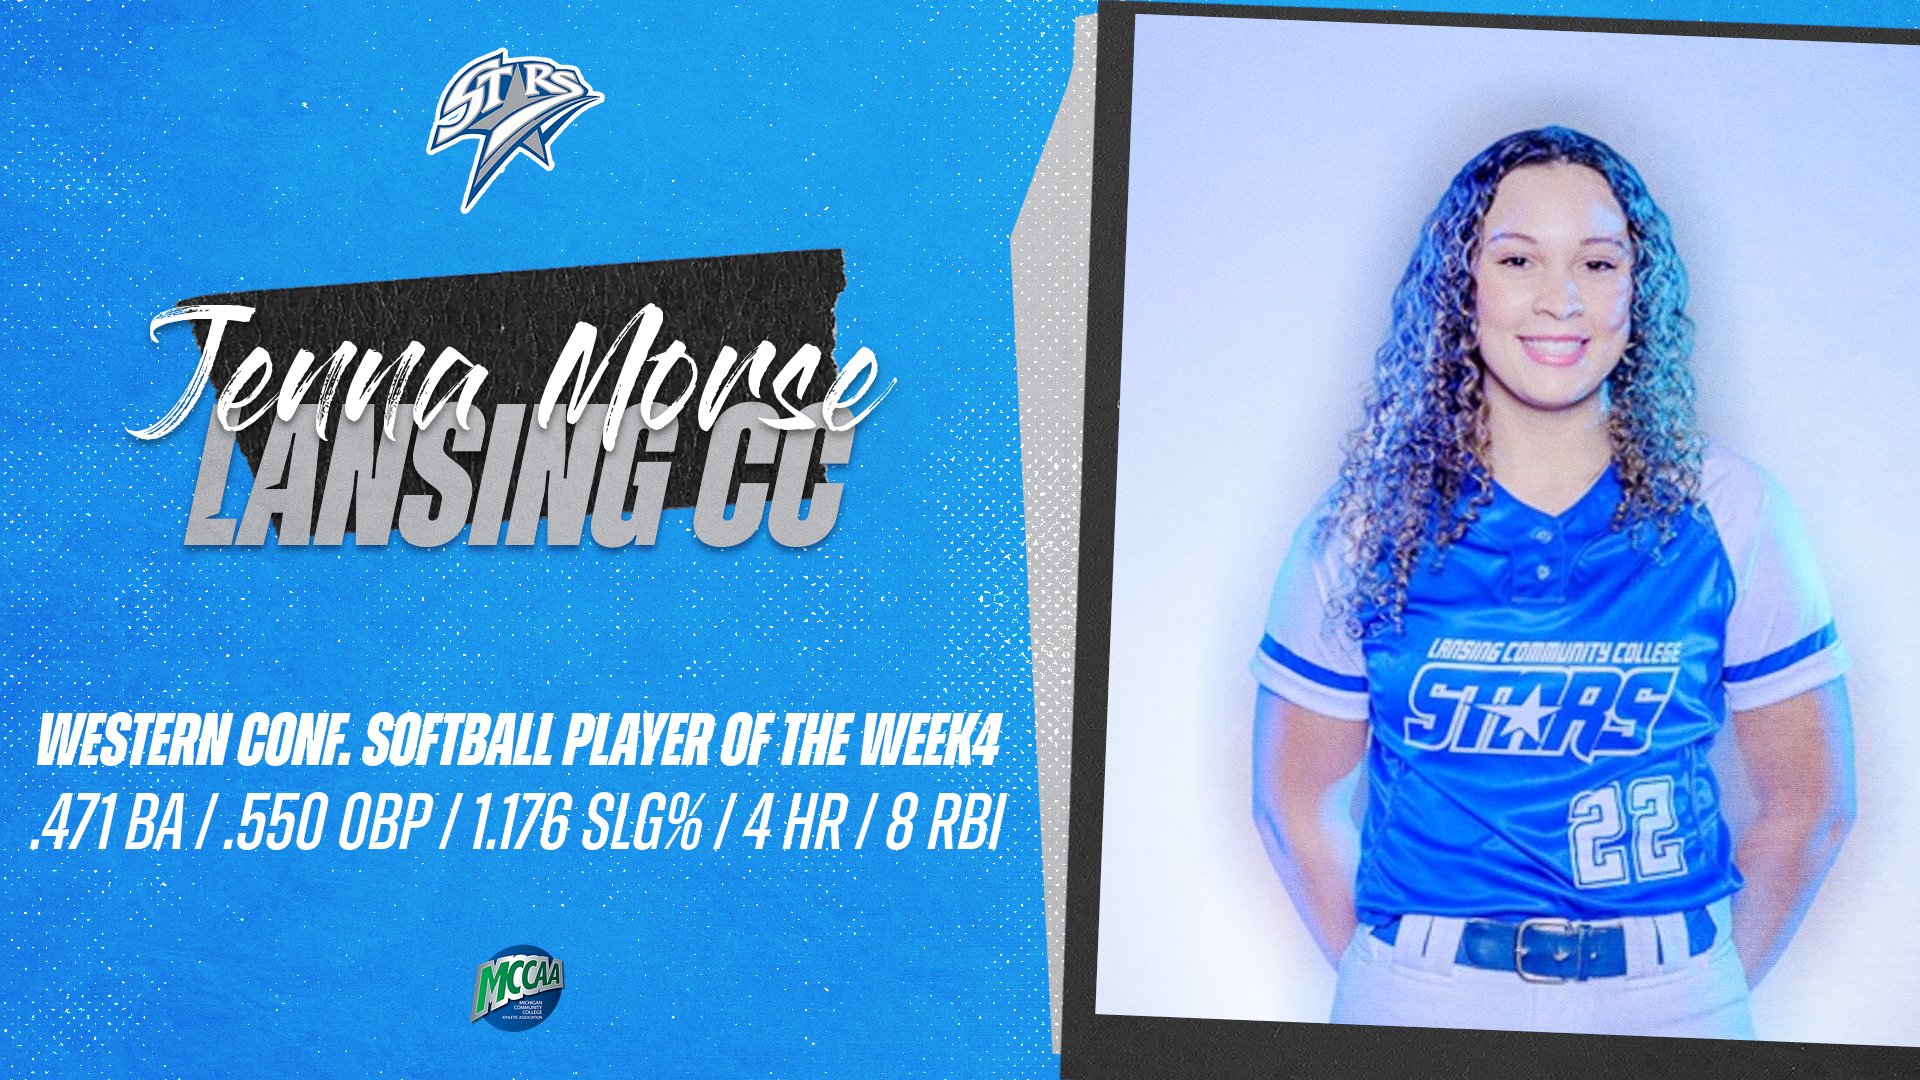 LCC's Morse Tabbed MCCAA Western Conference Softball Player of the Week4